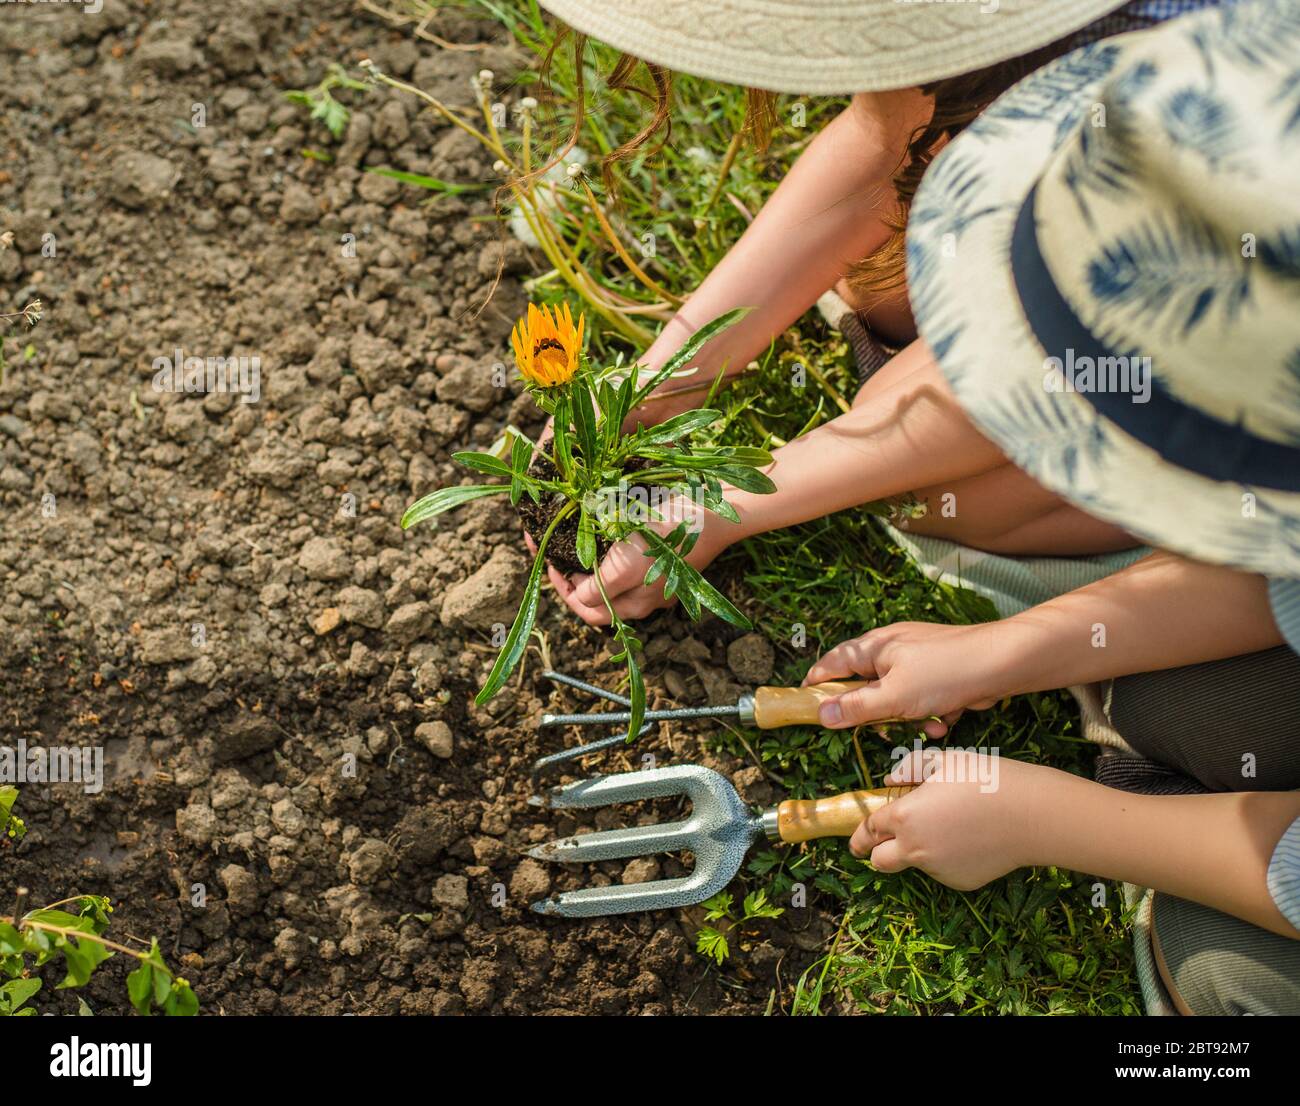 Young girl and blong boy gardeners planting flowers in the summer garden at sunset. Summer activities. Stock Photo